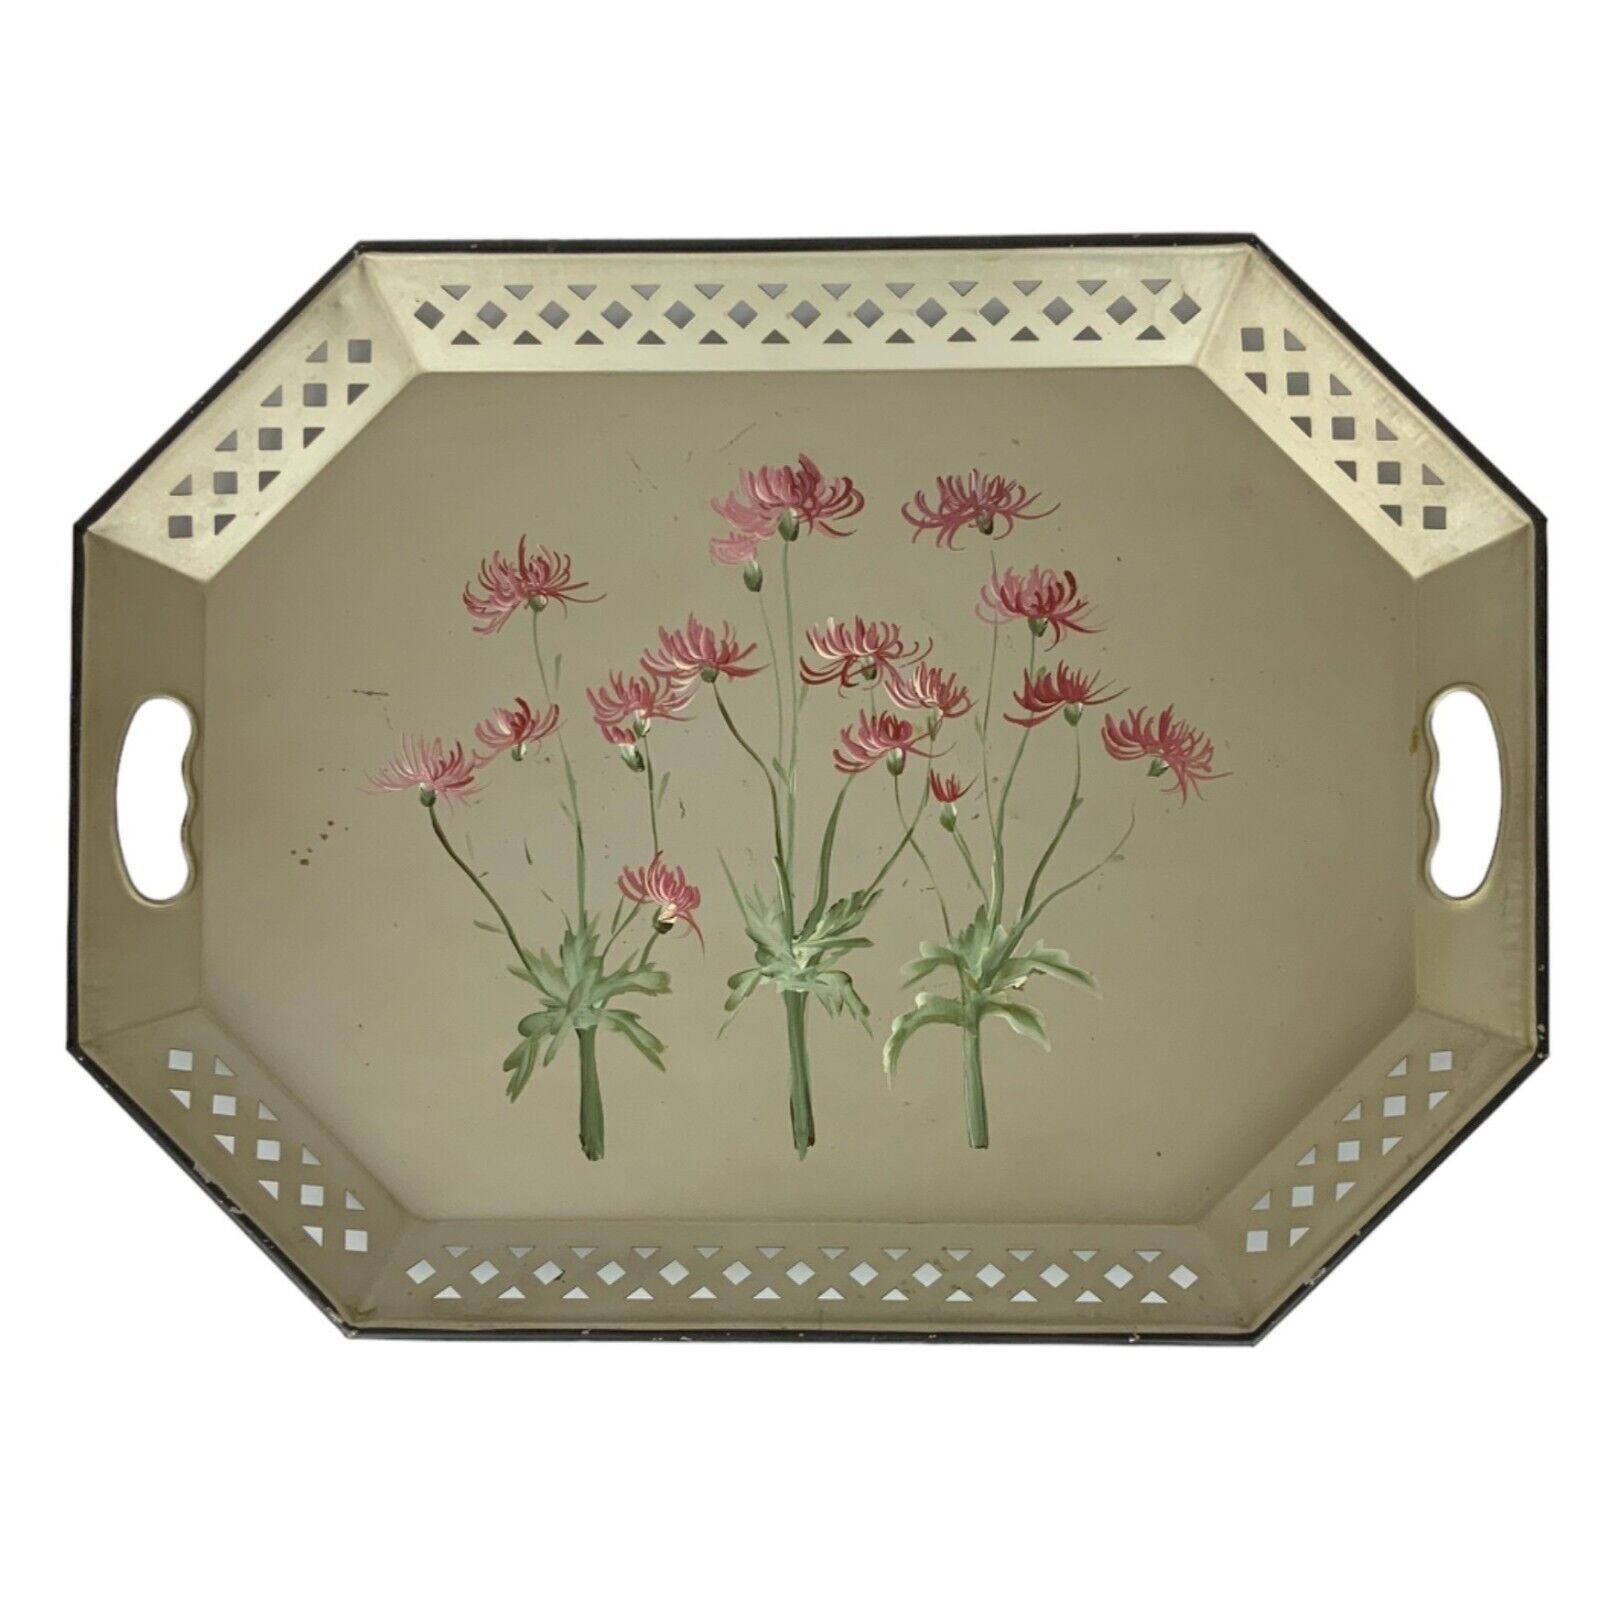 Nashco Hand Painted Metal Toleware Handled Serving Tray Pink Spider Lilies